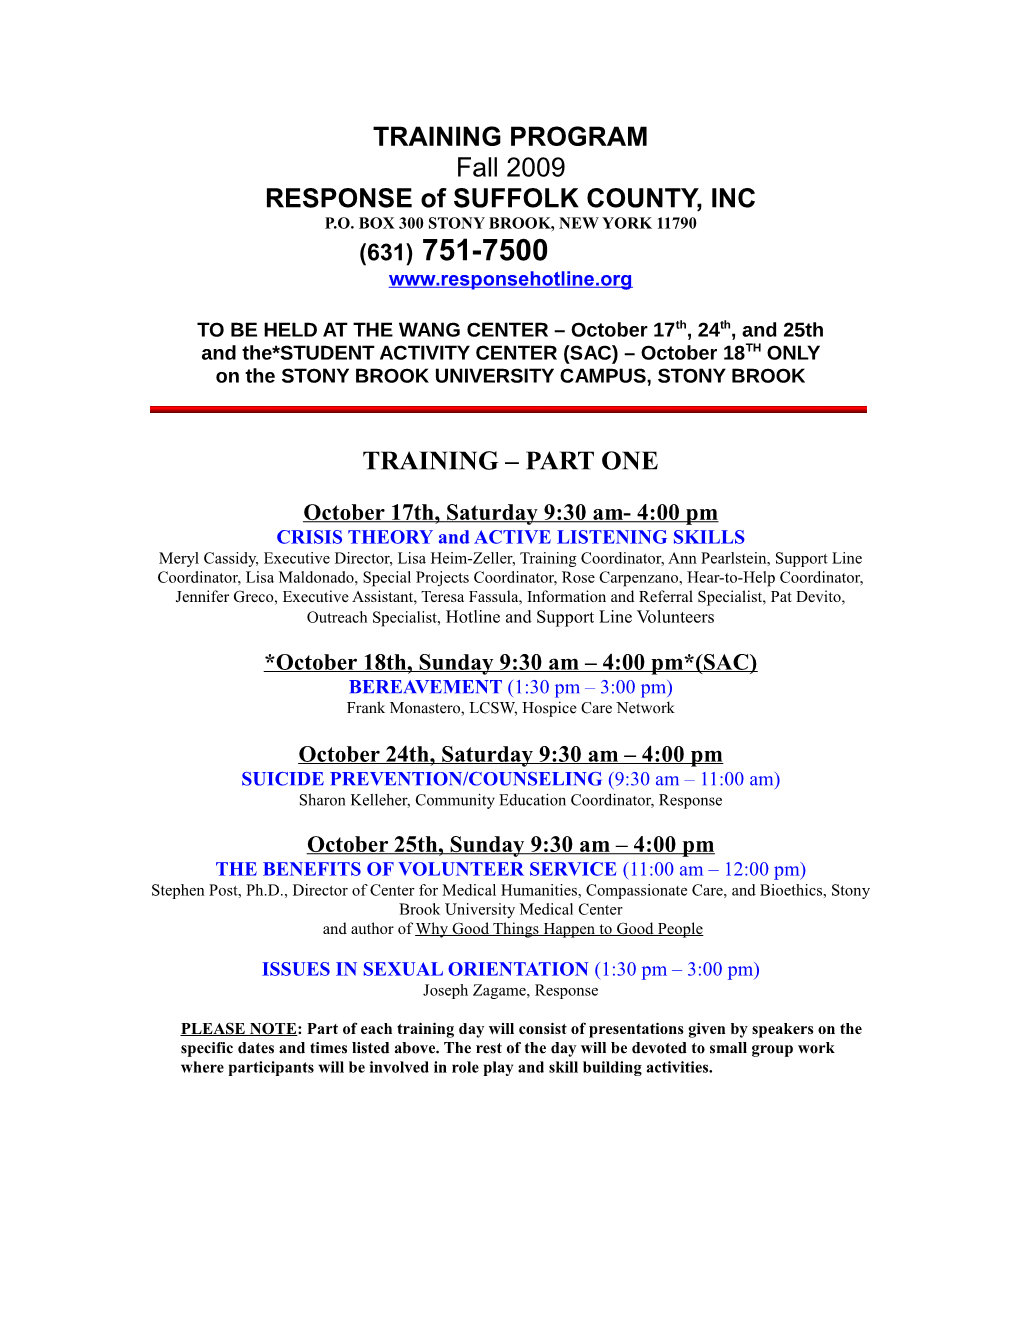 RESPONSE of SUFFOLK COUNTY, INC